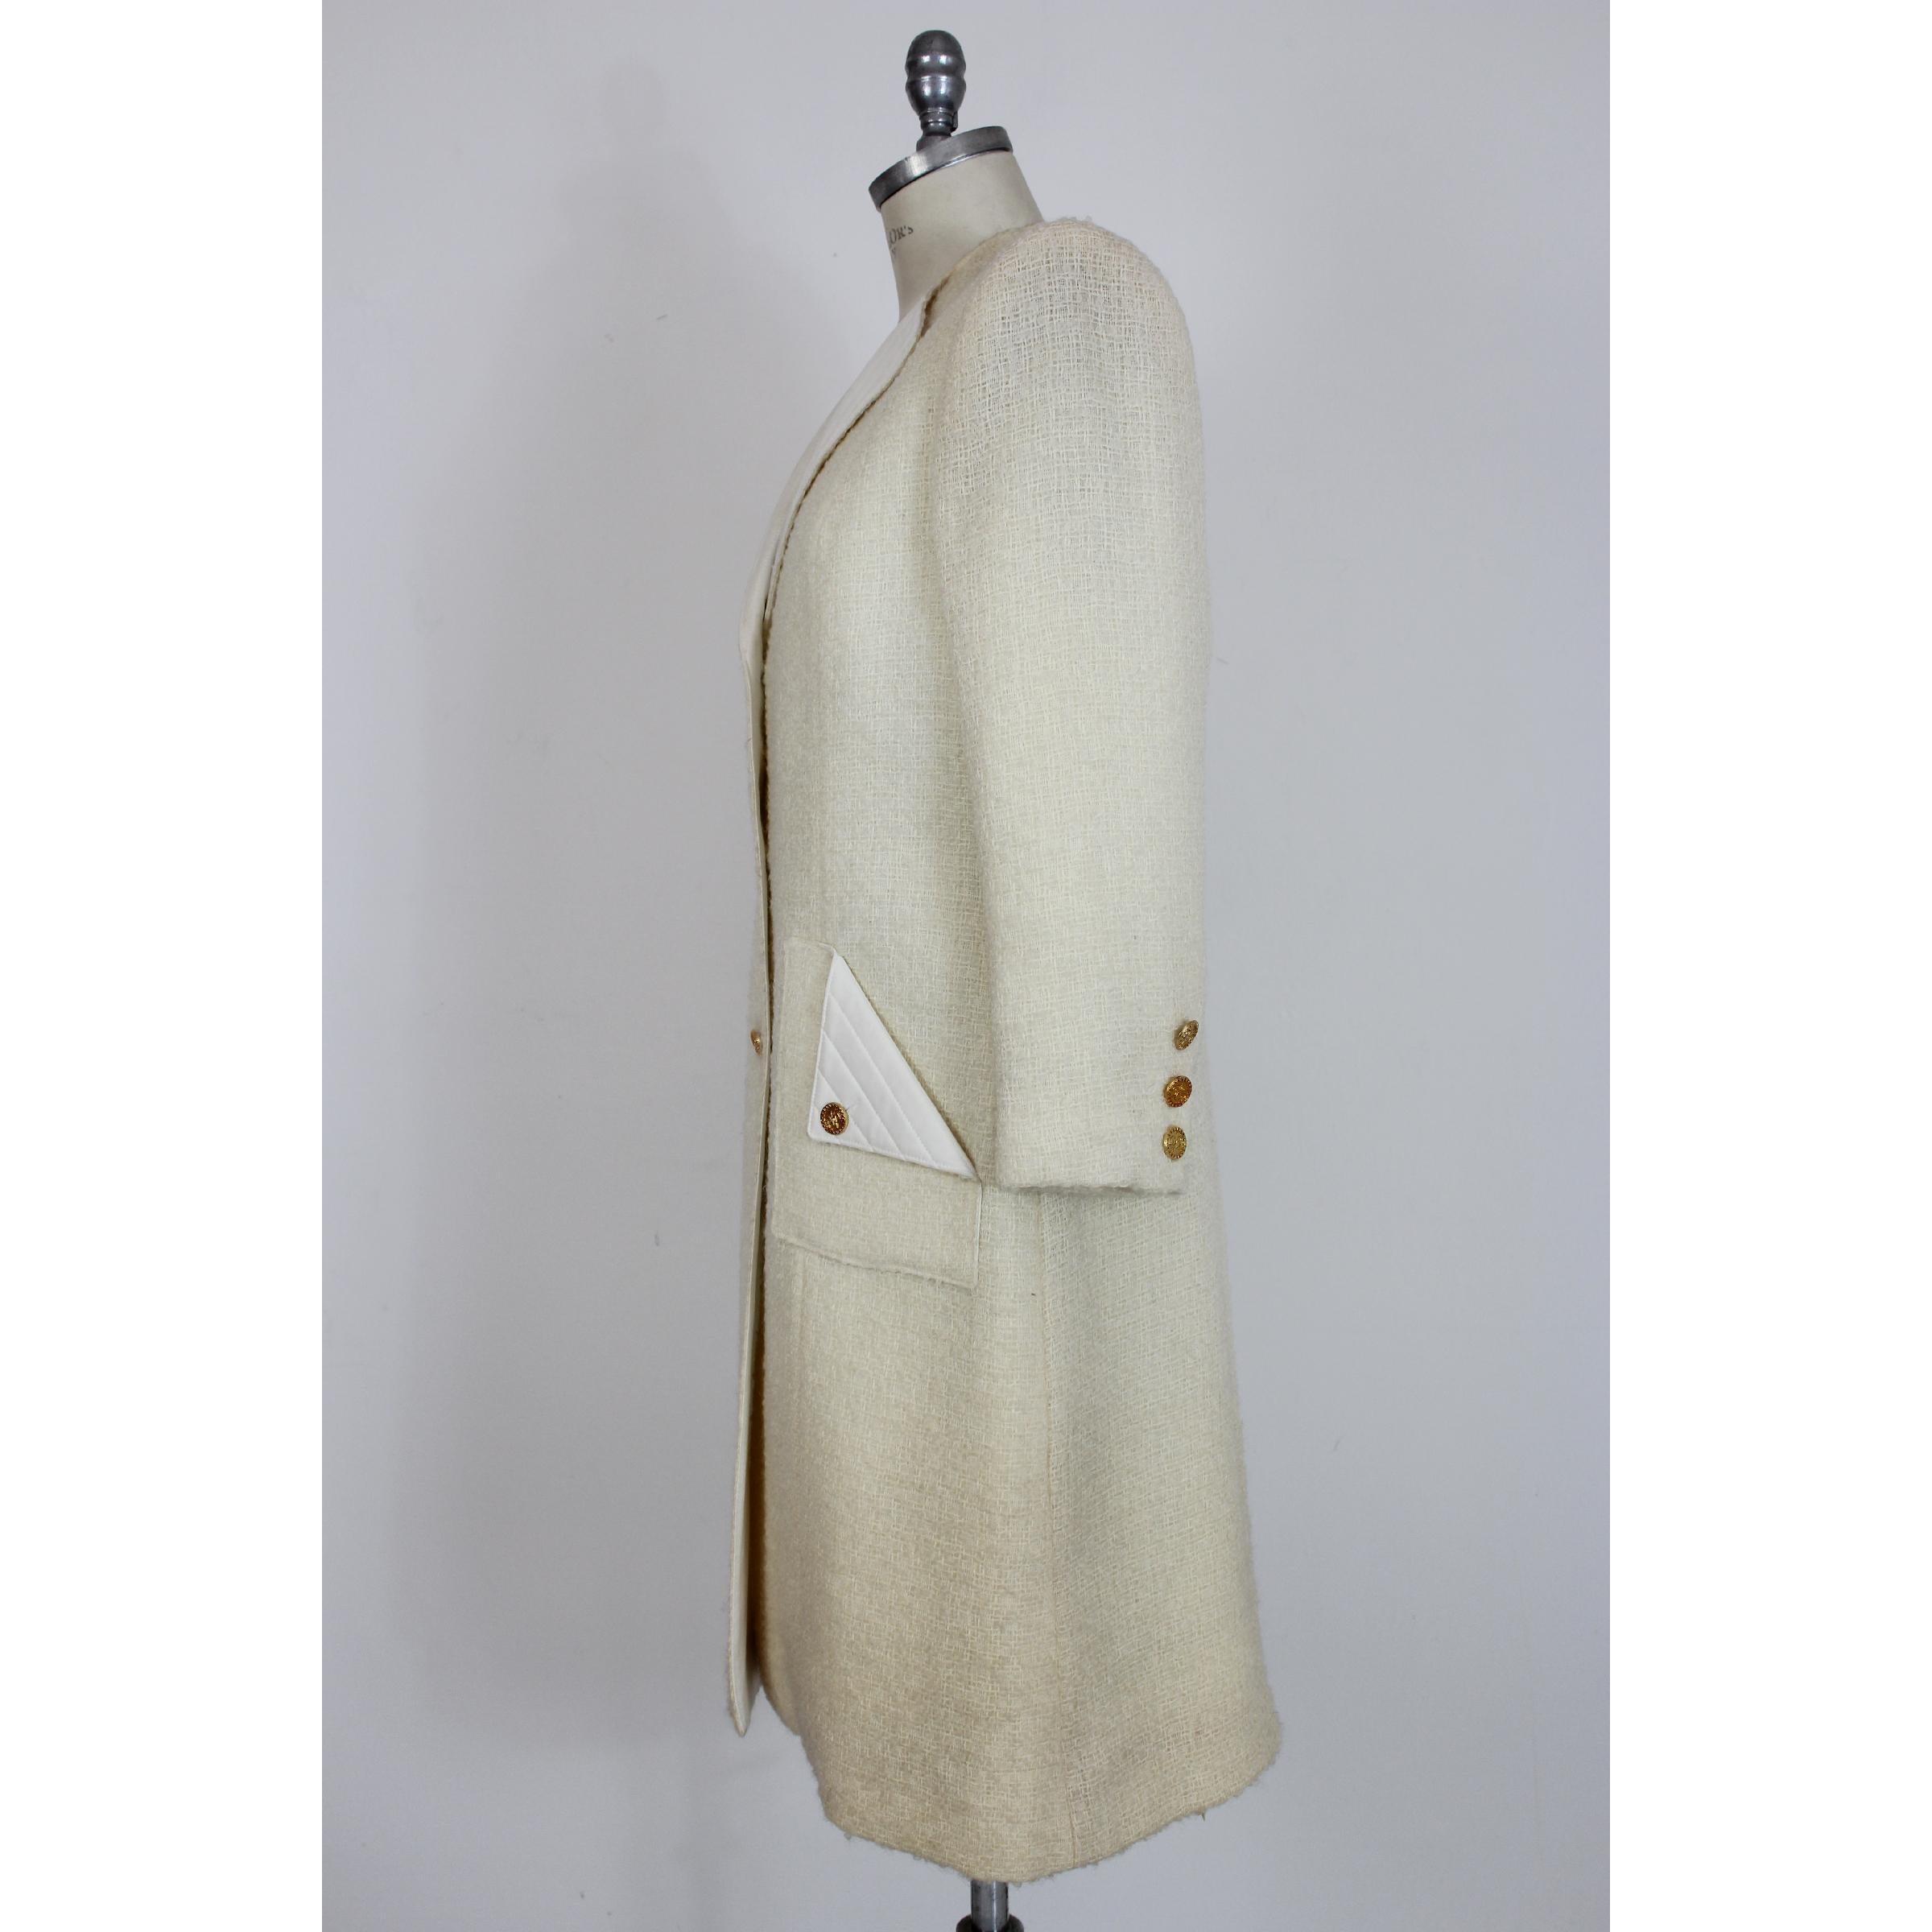 Paula Klein 80's vintage women's coat, long model, white, 100% pure wool with matelasse collar and pockets. Closure with gold-colored buttons, internally lined. Made in France. Very good vintage conditions, with some small spots that do not